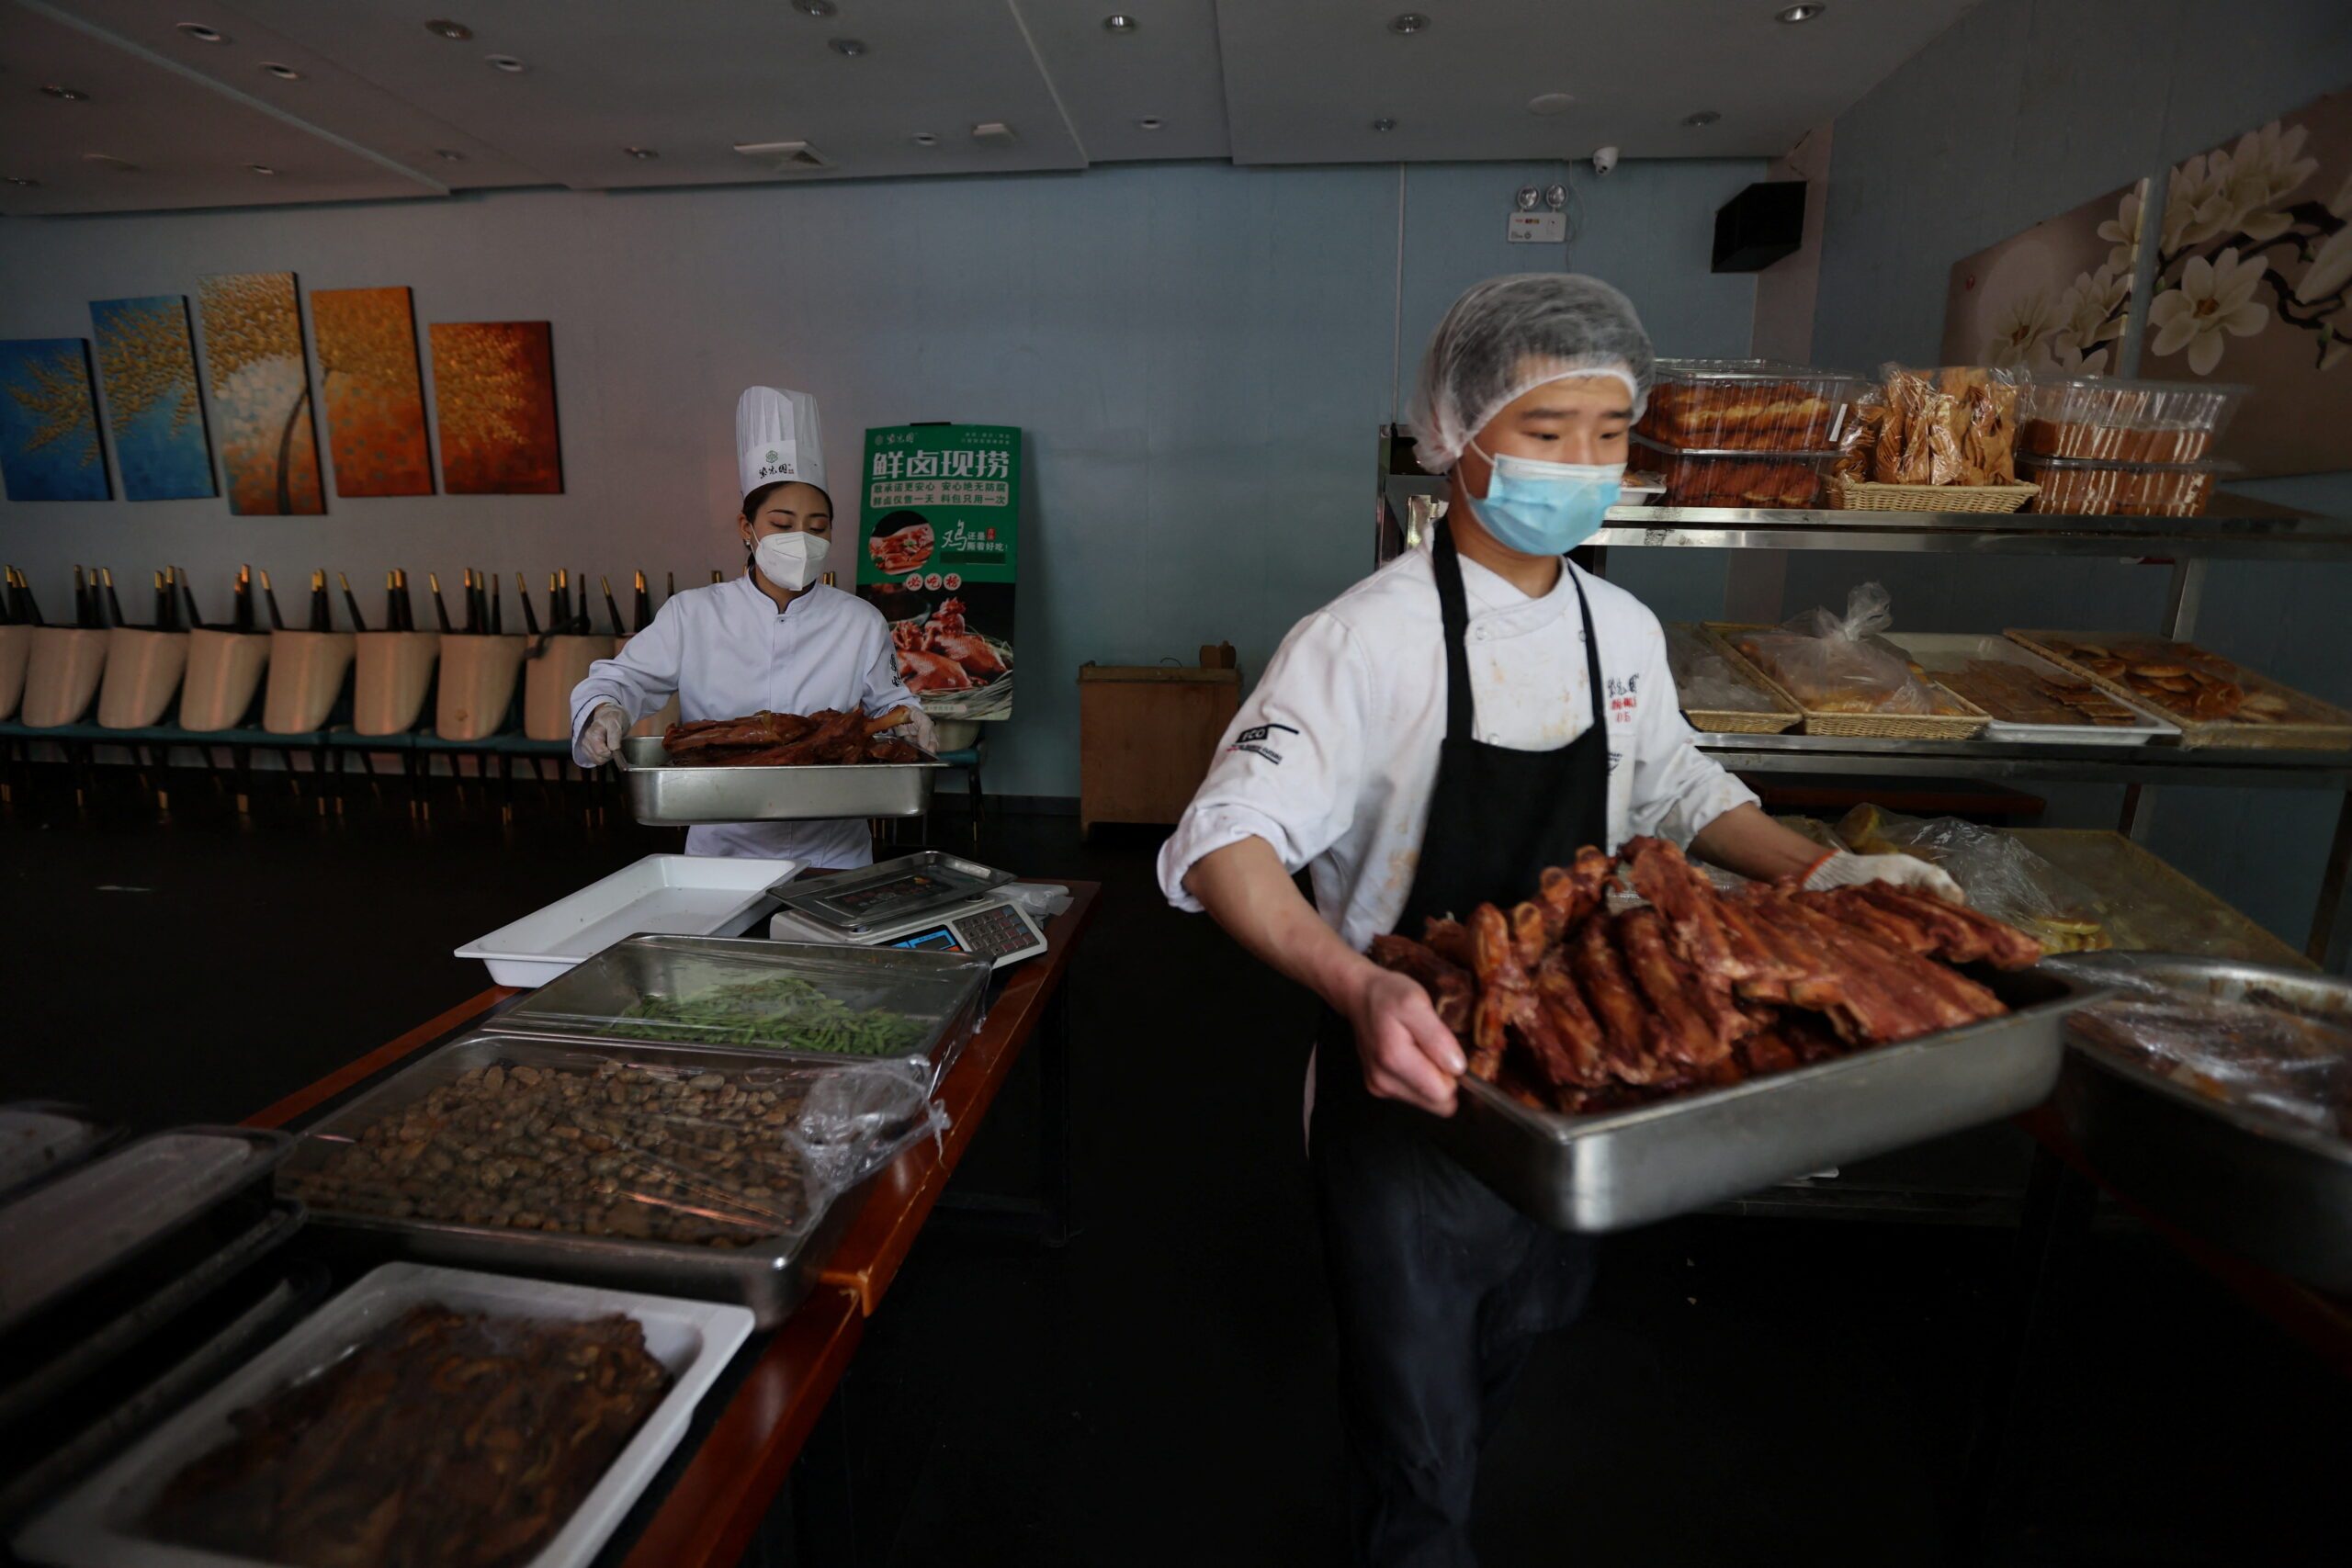 COVID or no COVID, Beijing diners won’t be denied their Peking duck